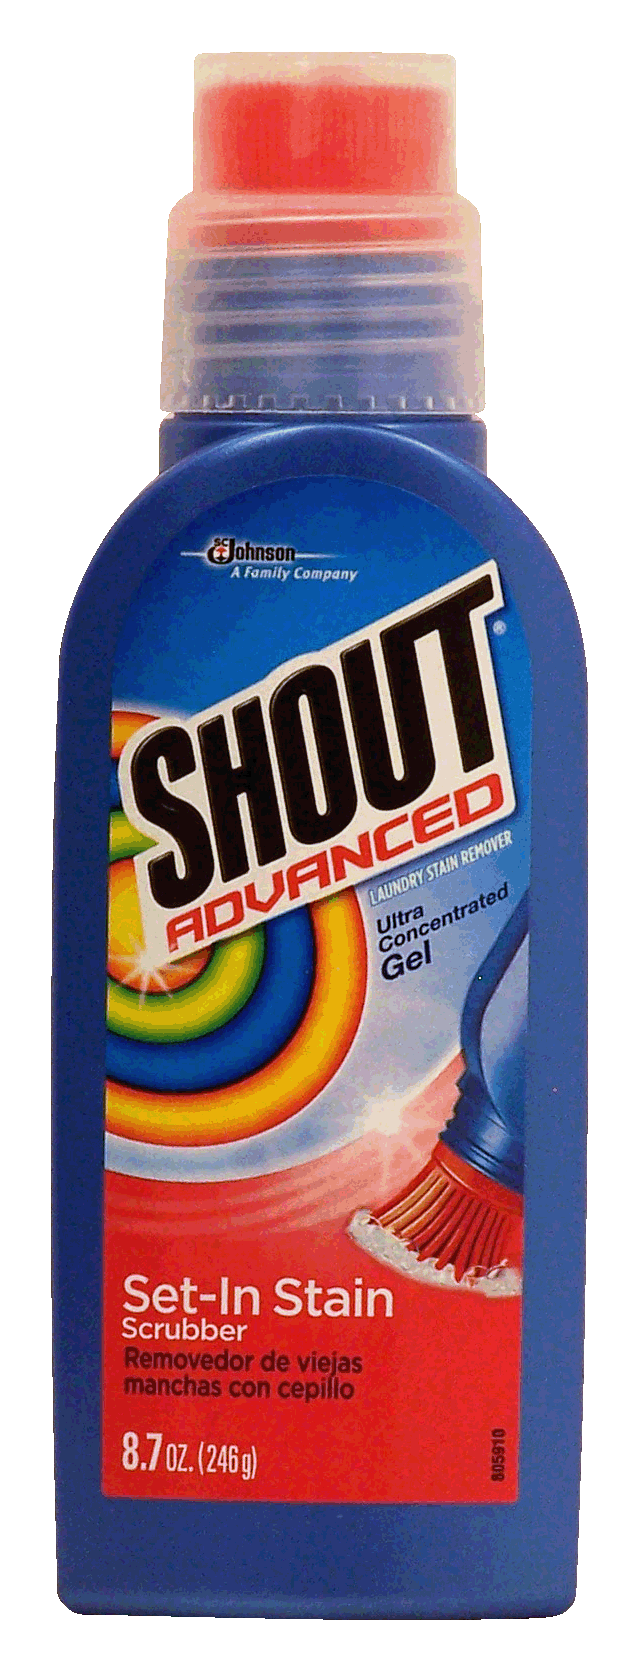 Shout Advanced laundry stain remover ultra concentrated gel, set-in stain scrubber Full-Size Picture